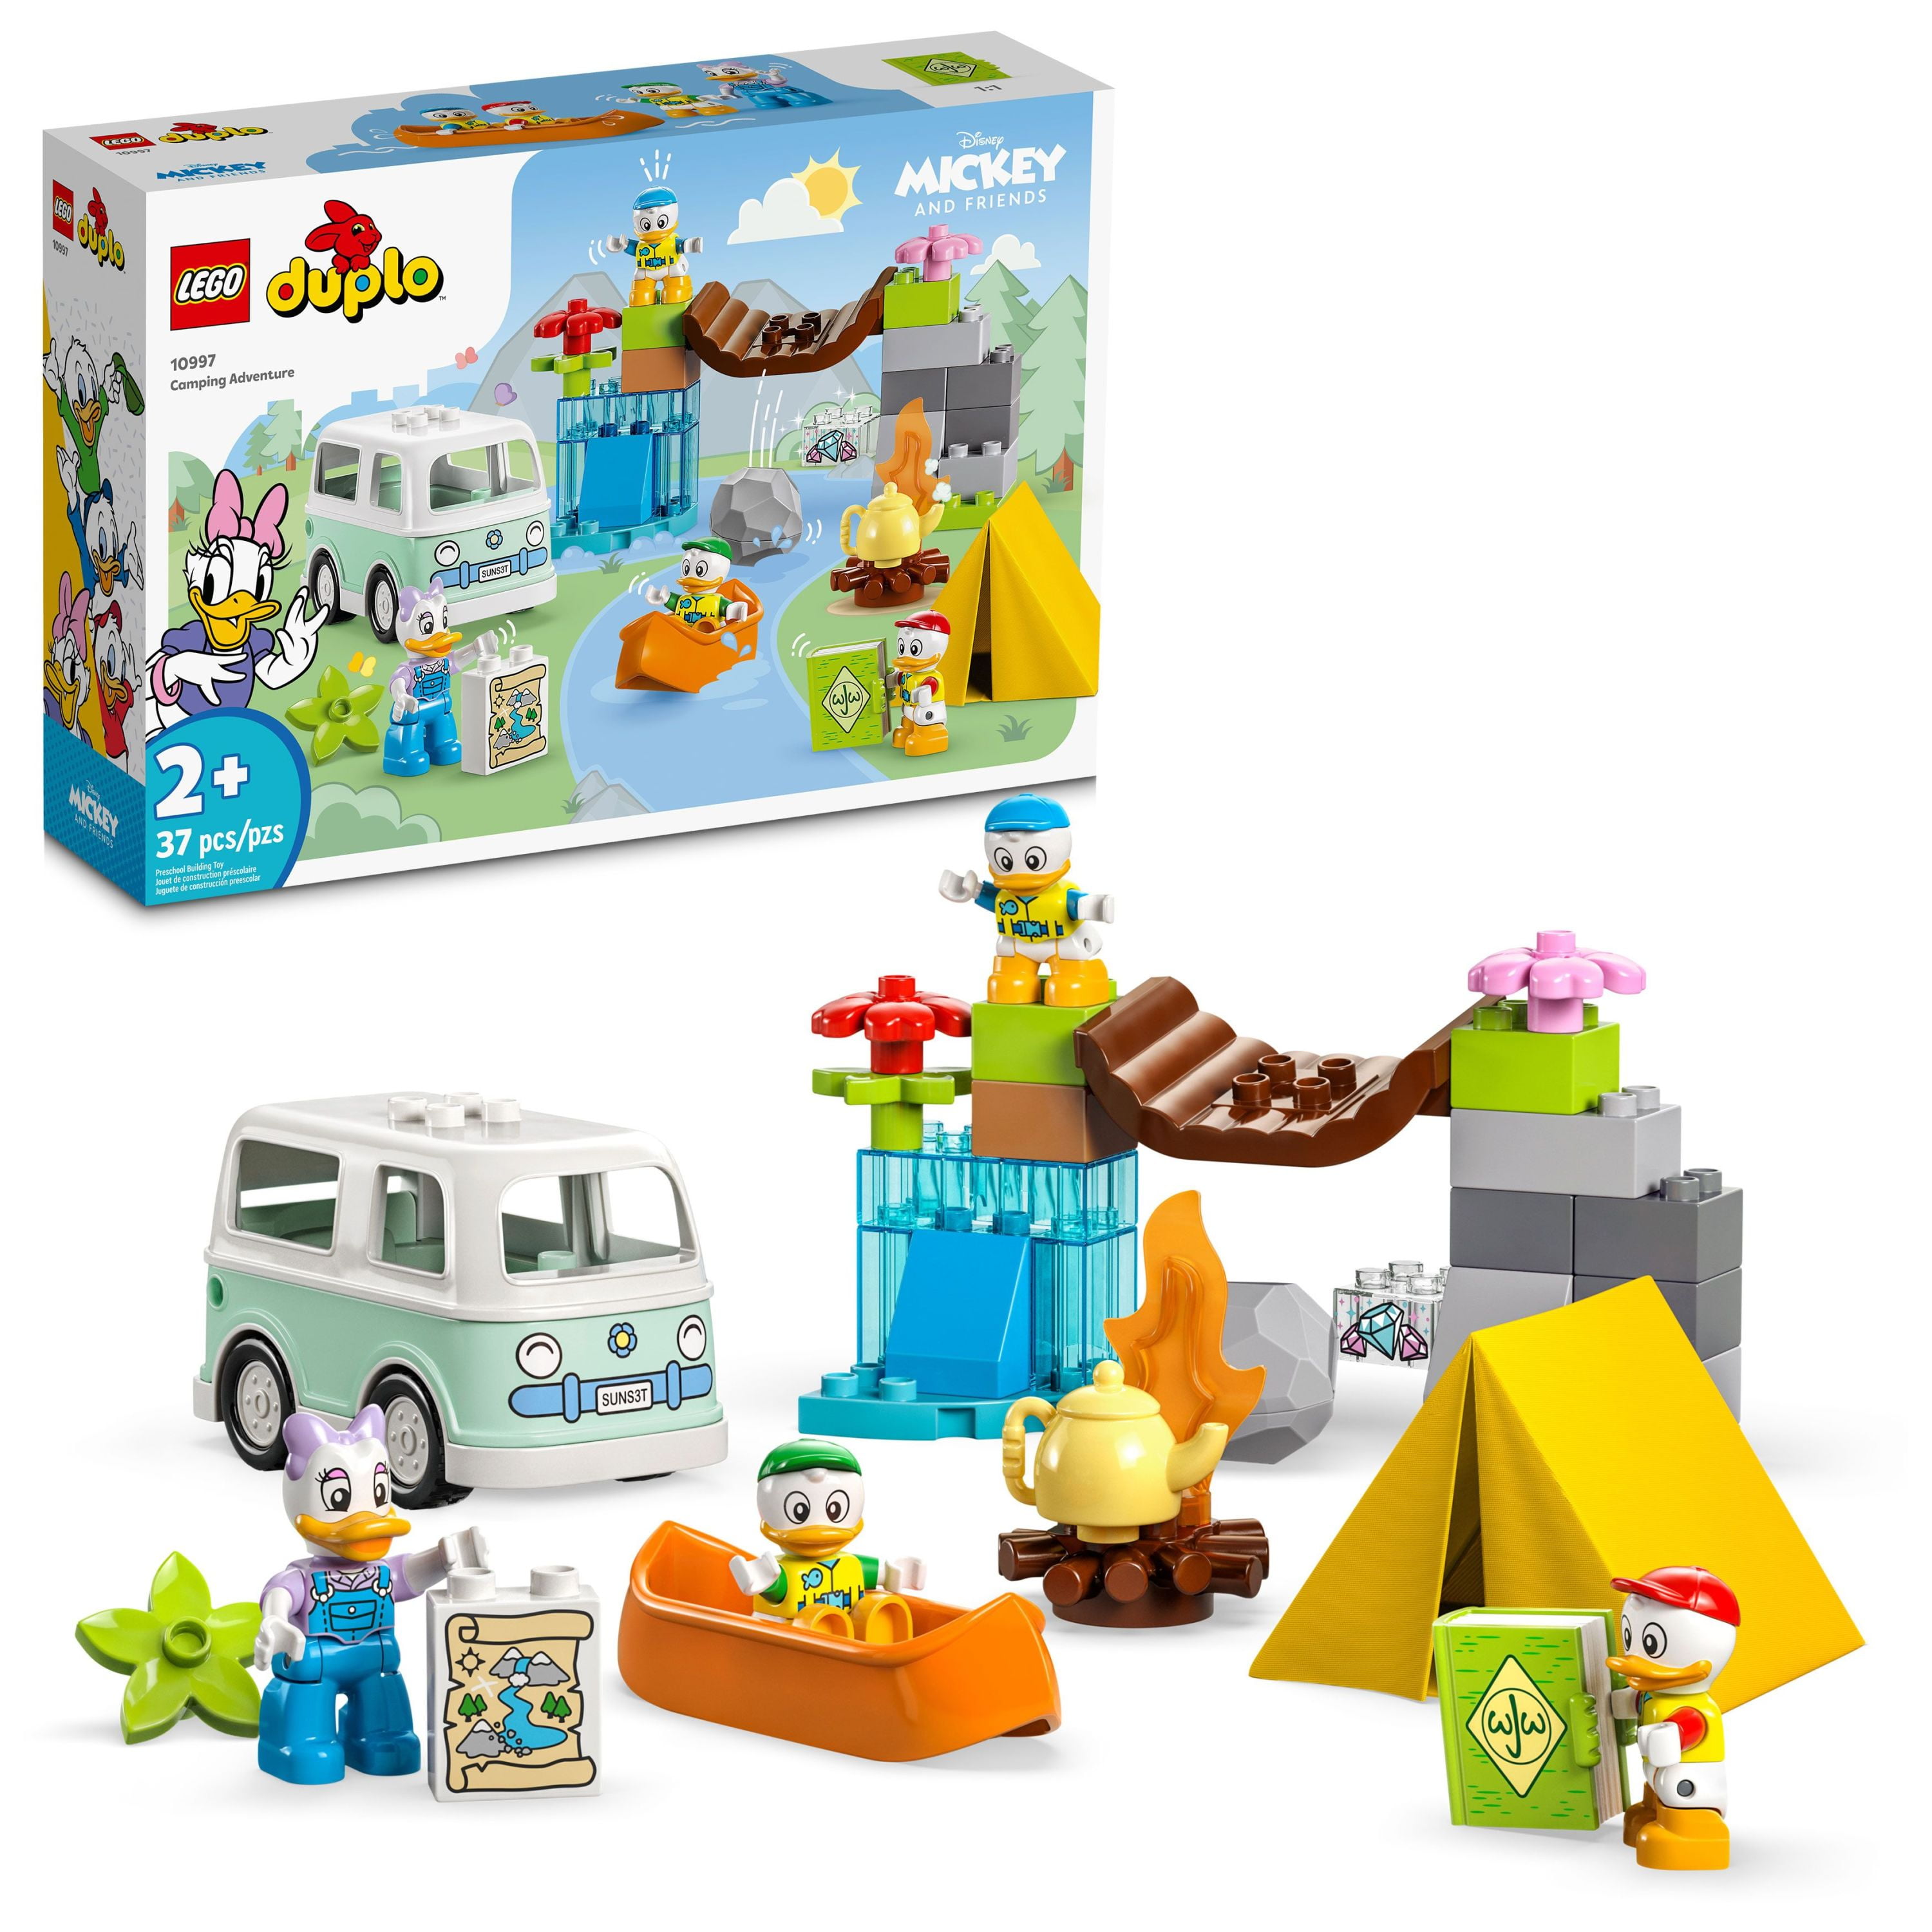 LEGO DUPLO Disney Mickey and Friends Camping Adventure 10997 Toddler  Building Toy Set, Features 4 LEGO DUPLO Toy Figures: Daisy Duck, Huey,  Dewey and